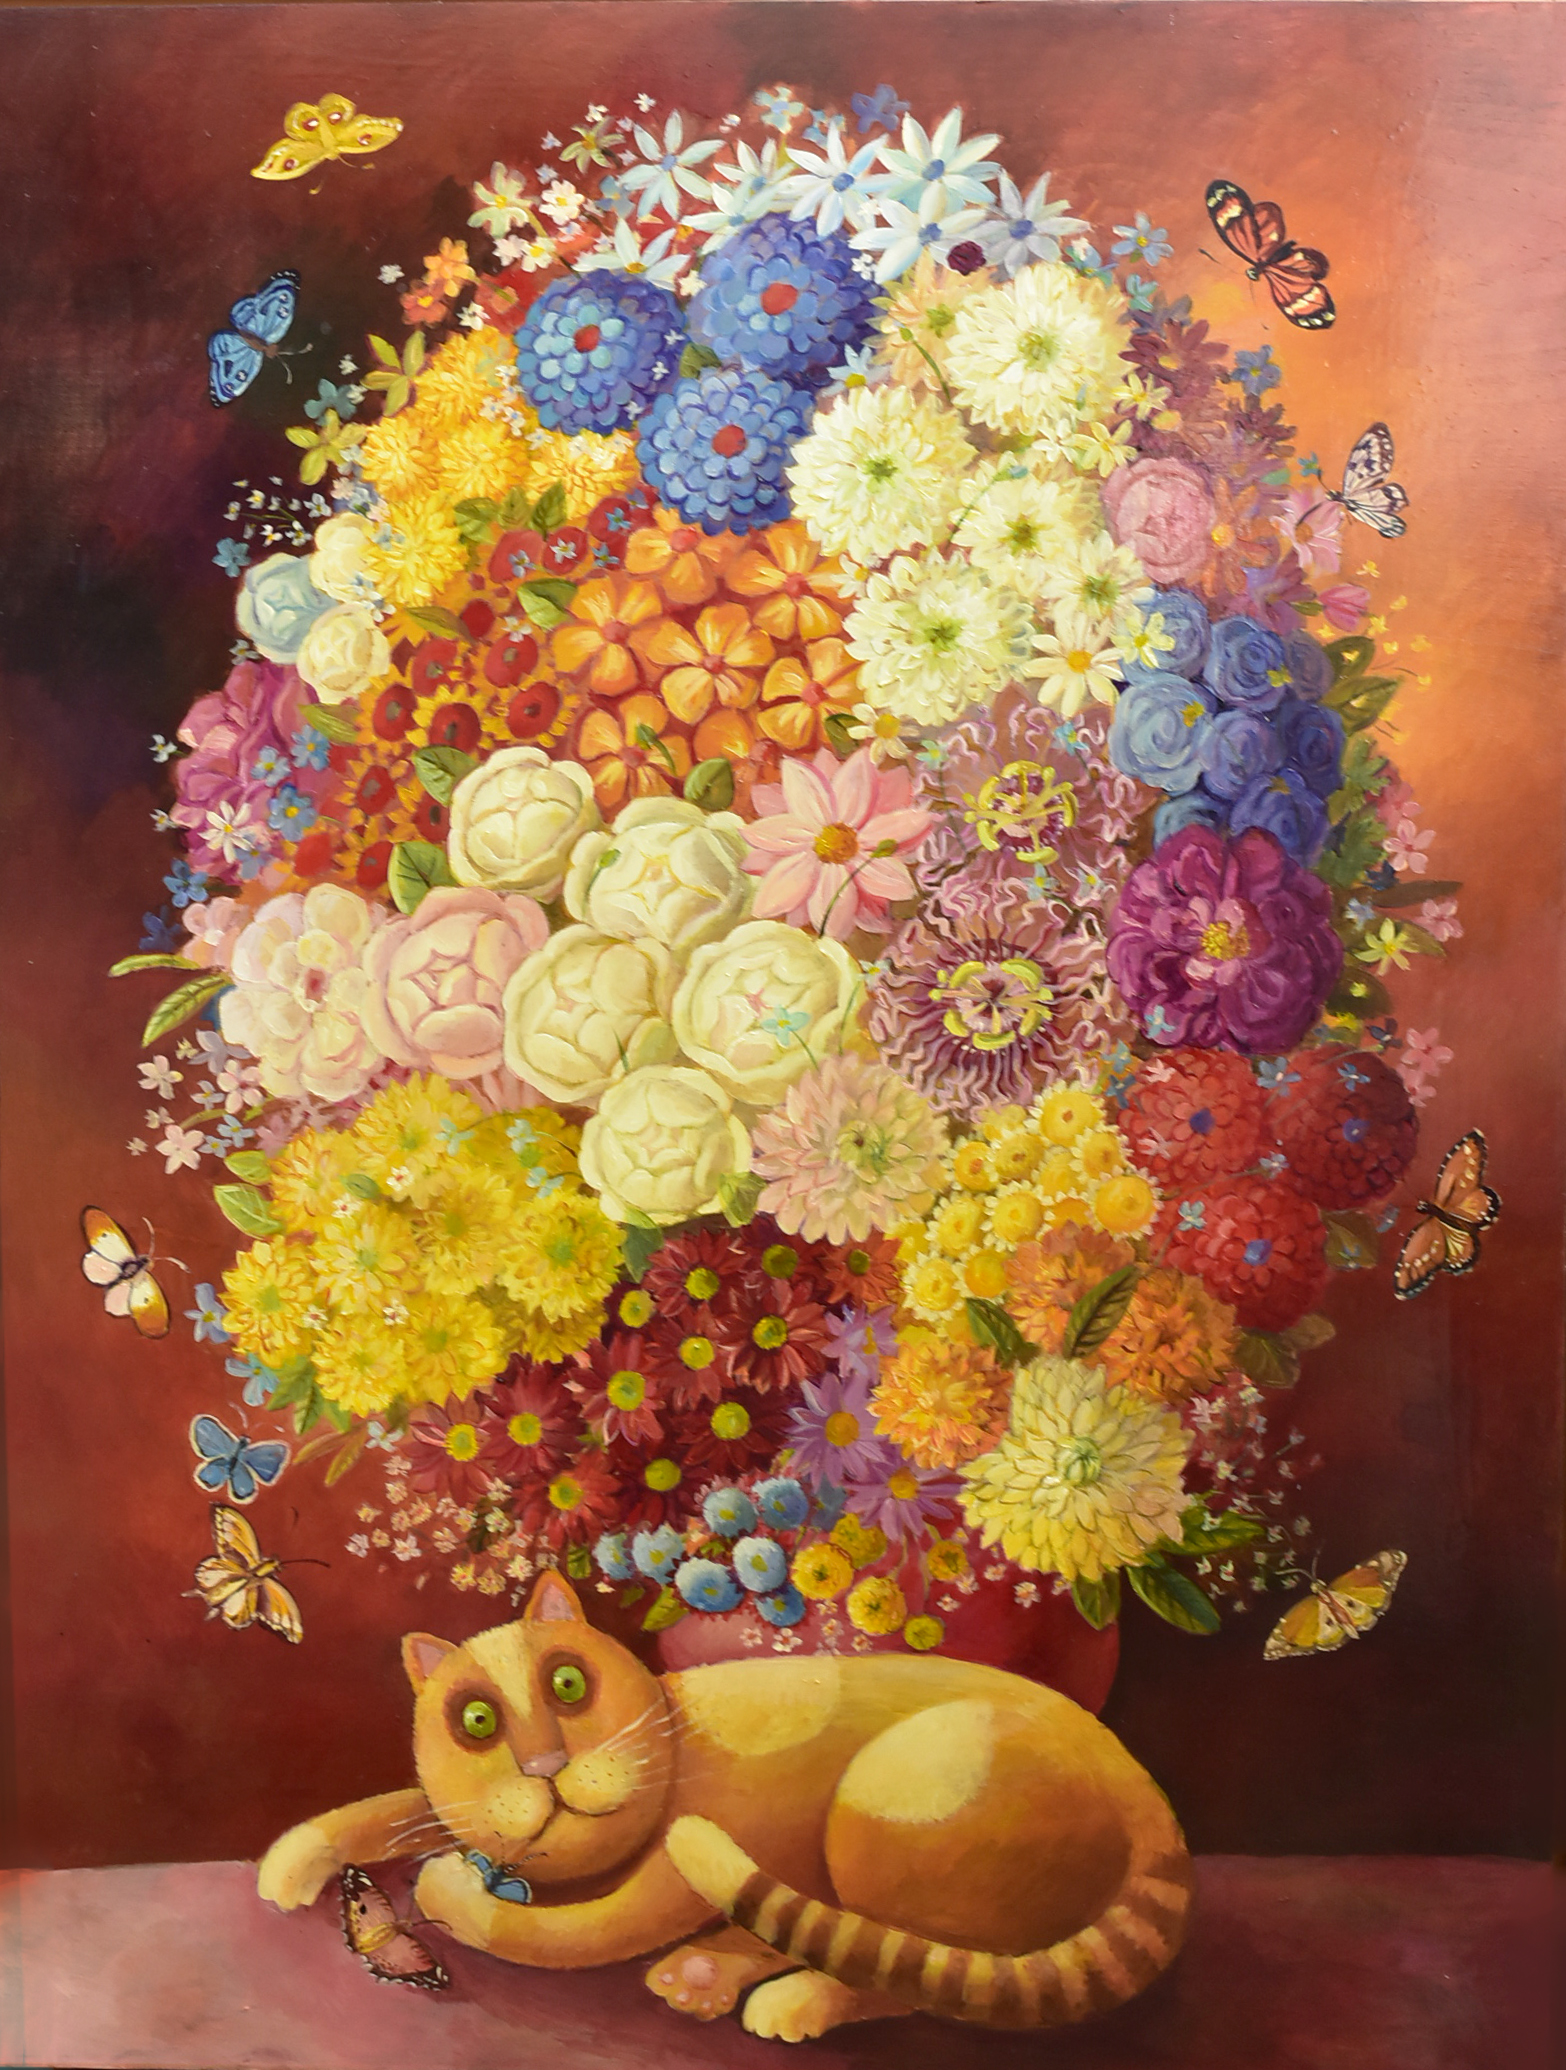 Anna Varella (b. 1971) acrylic on board, 'Floral Still Life with Cat', signed and dated 'Anna - Image 2 of 2